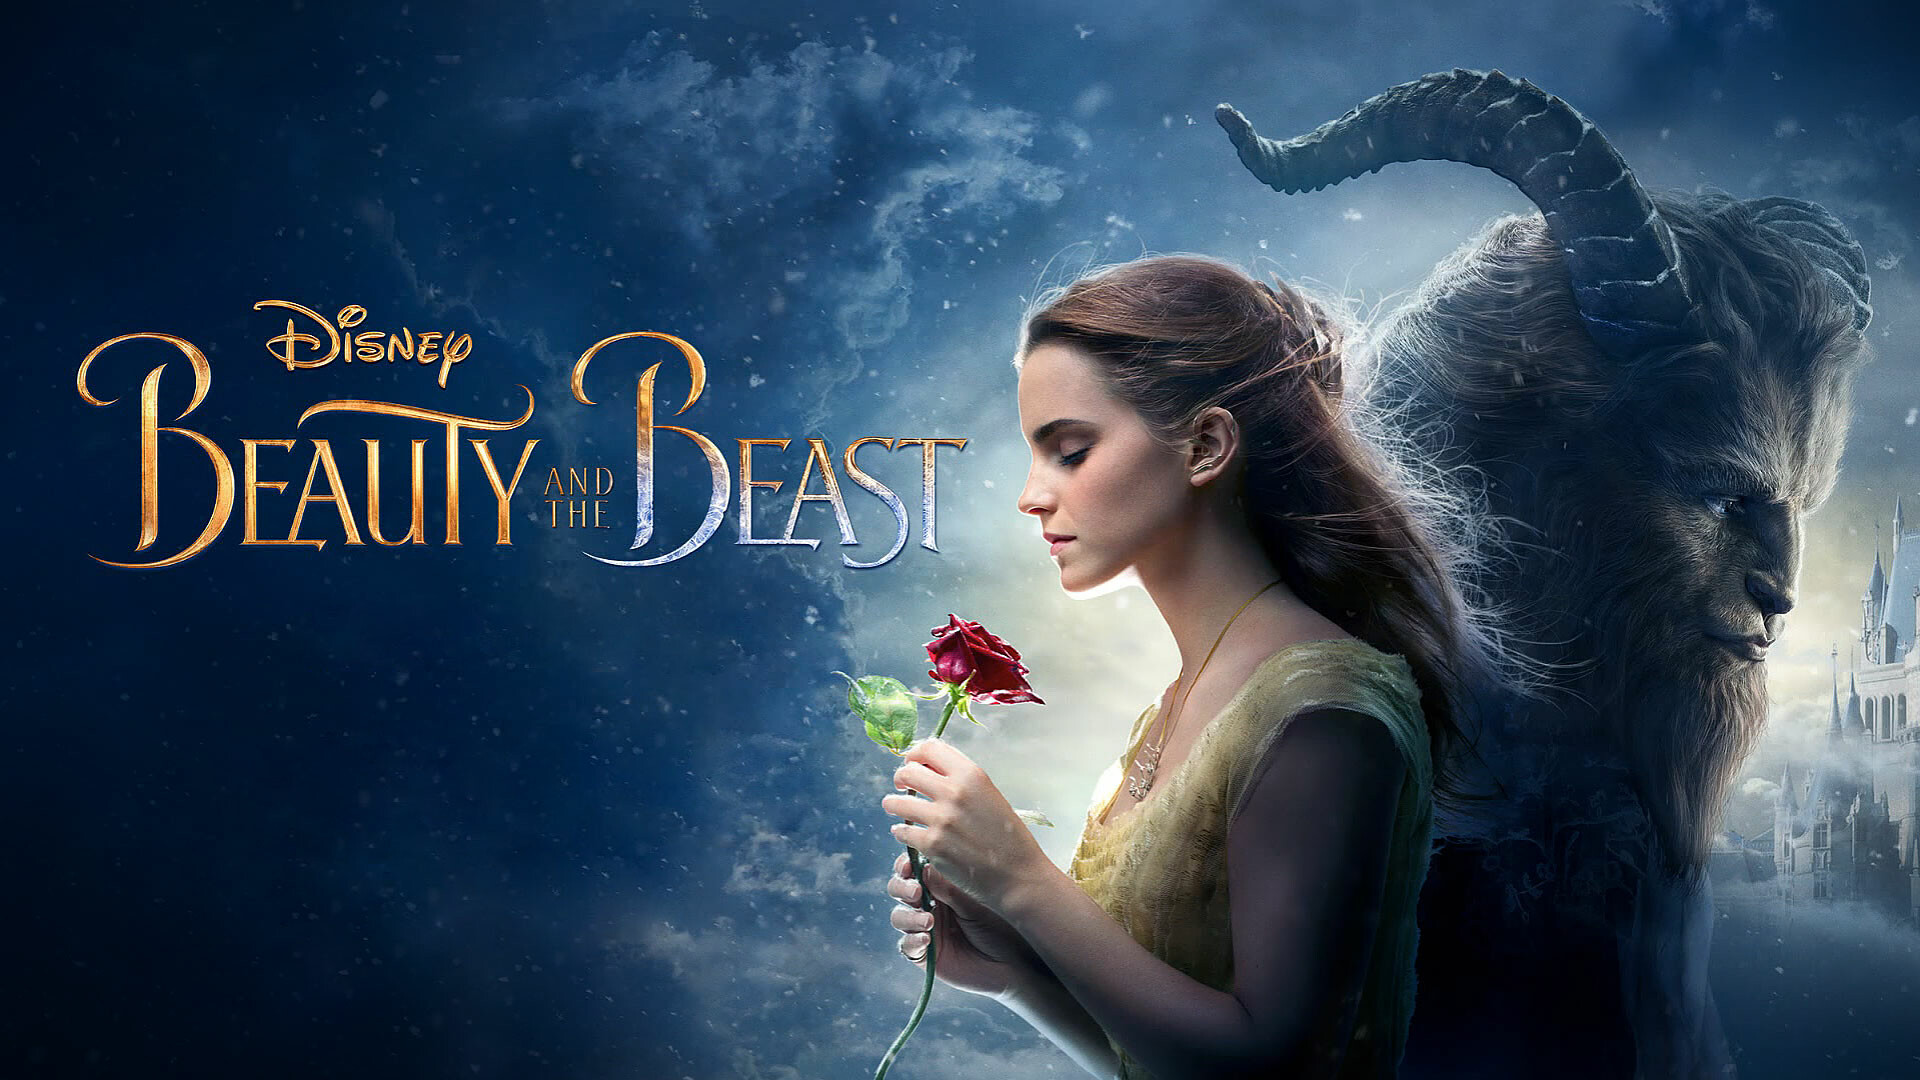 Beauty and the Beast: Belle, A young woman taken prisoner by a monster in its castle. 1920x1080 Full HD Background.